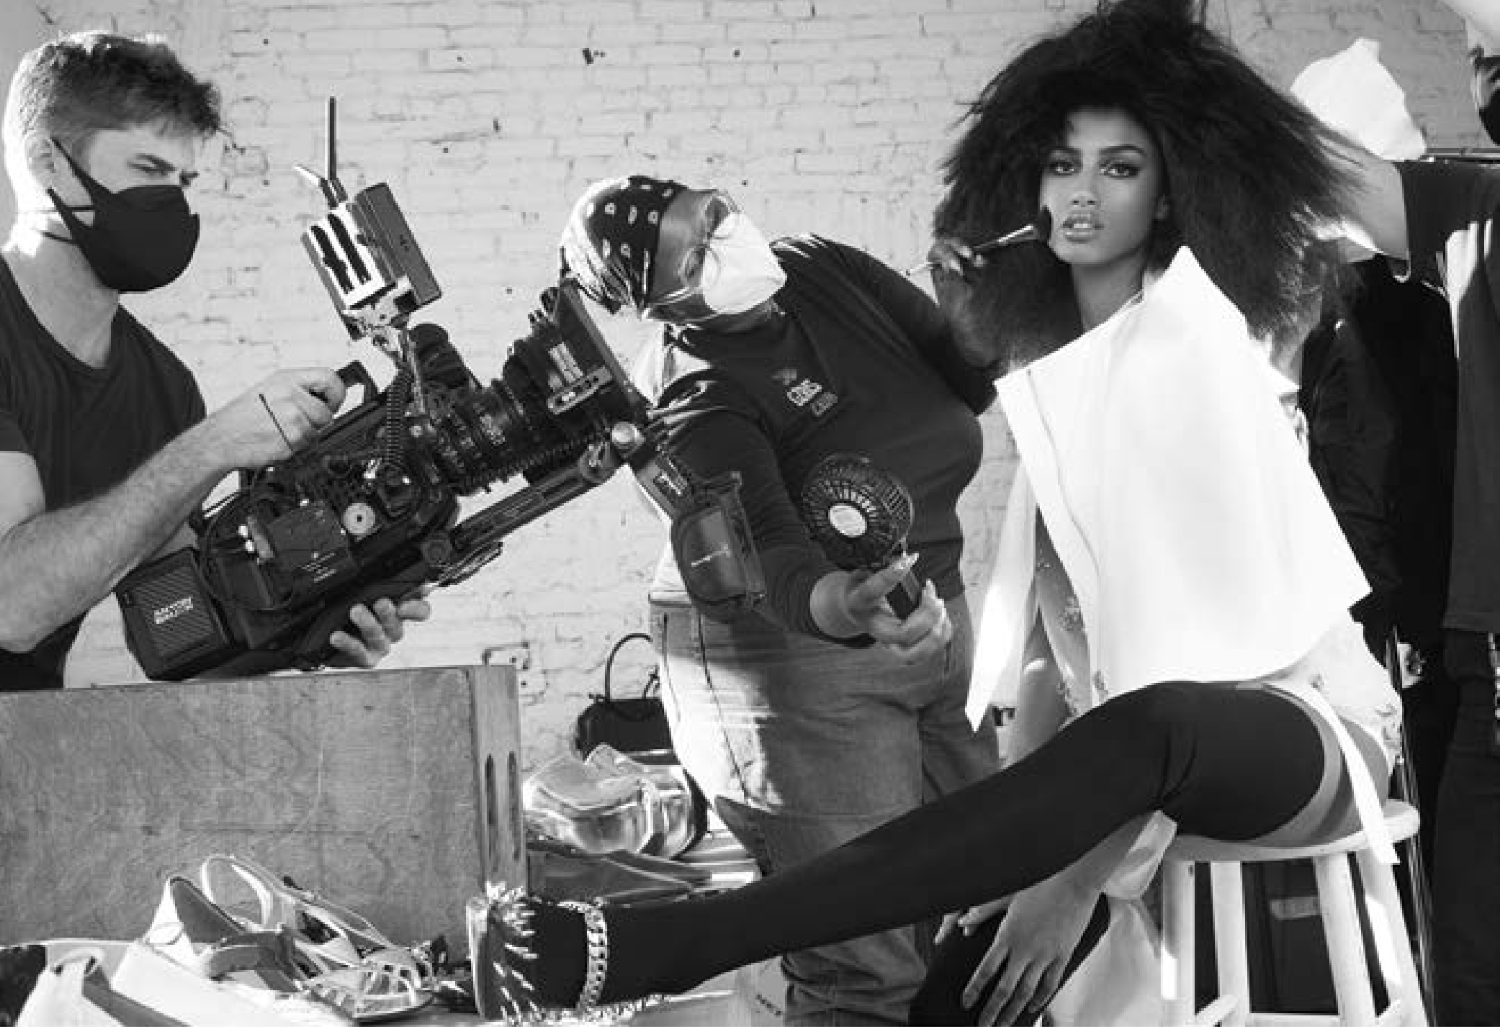 Imaan Hammam by Ethan James Green M Le Mag du Monde 2-27-21 (18).png